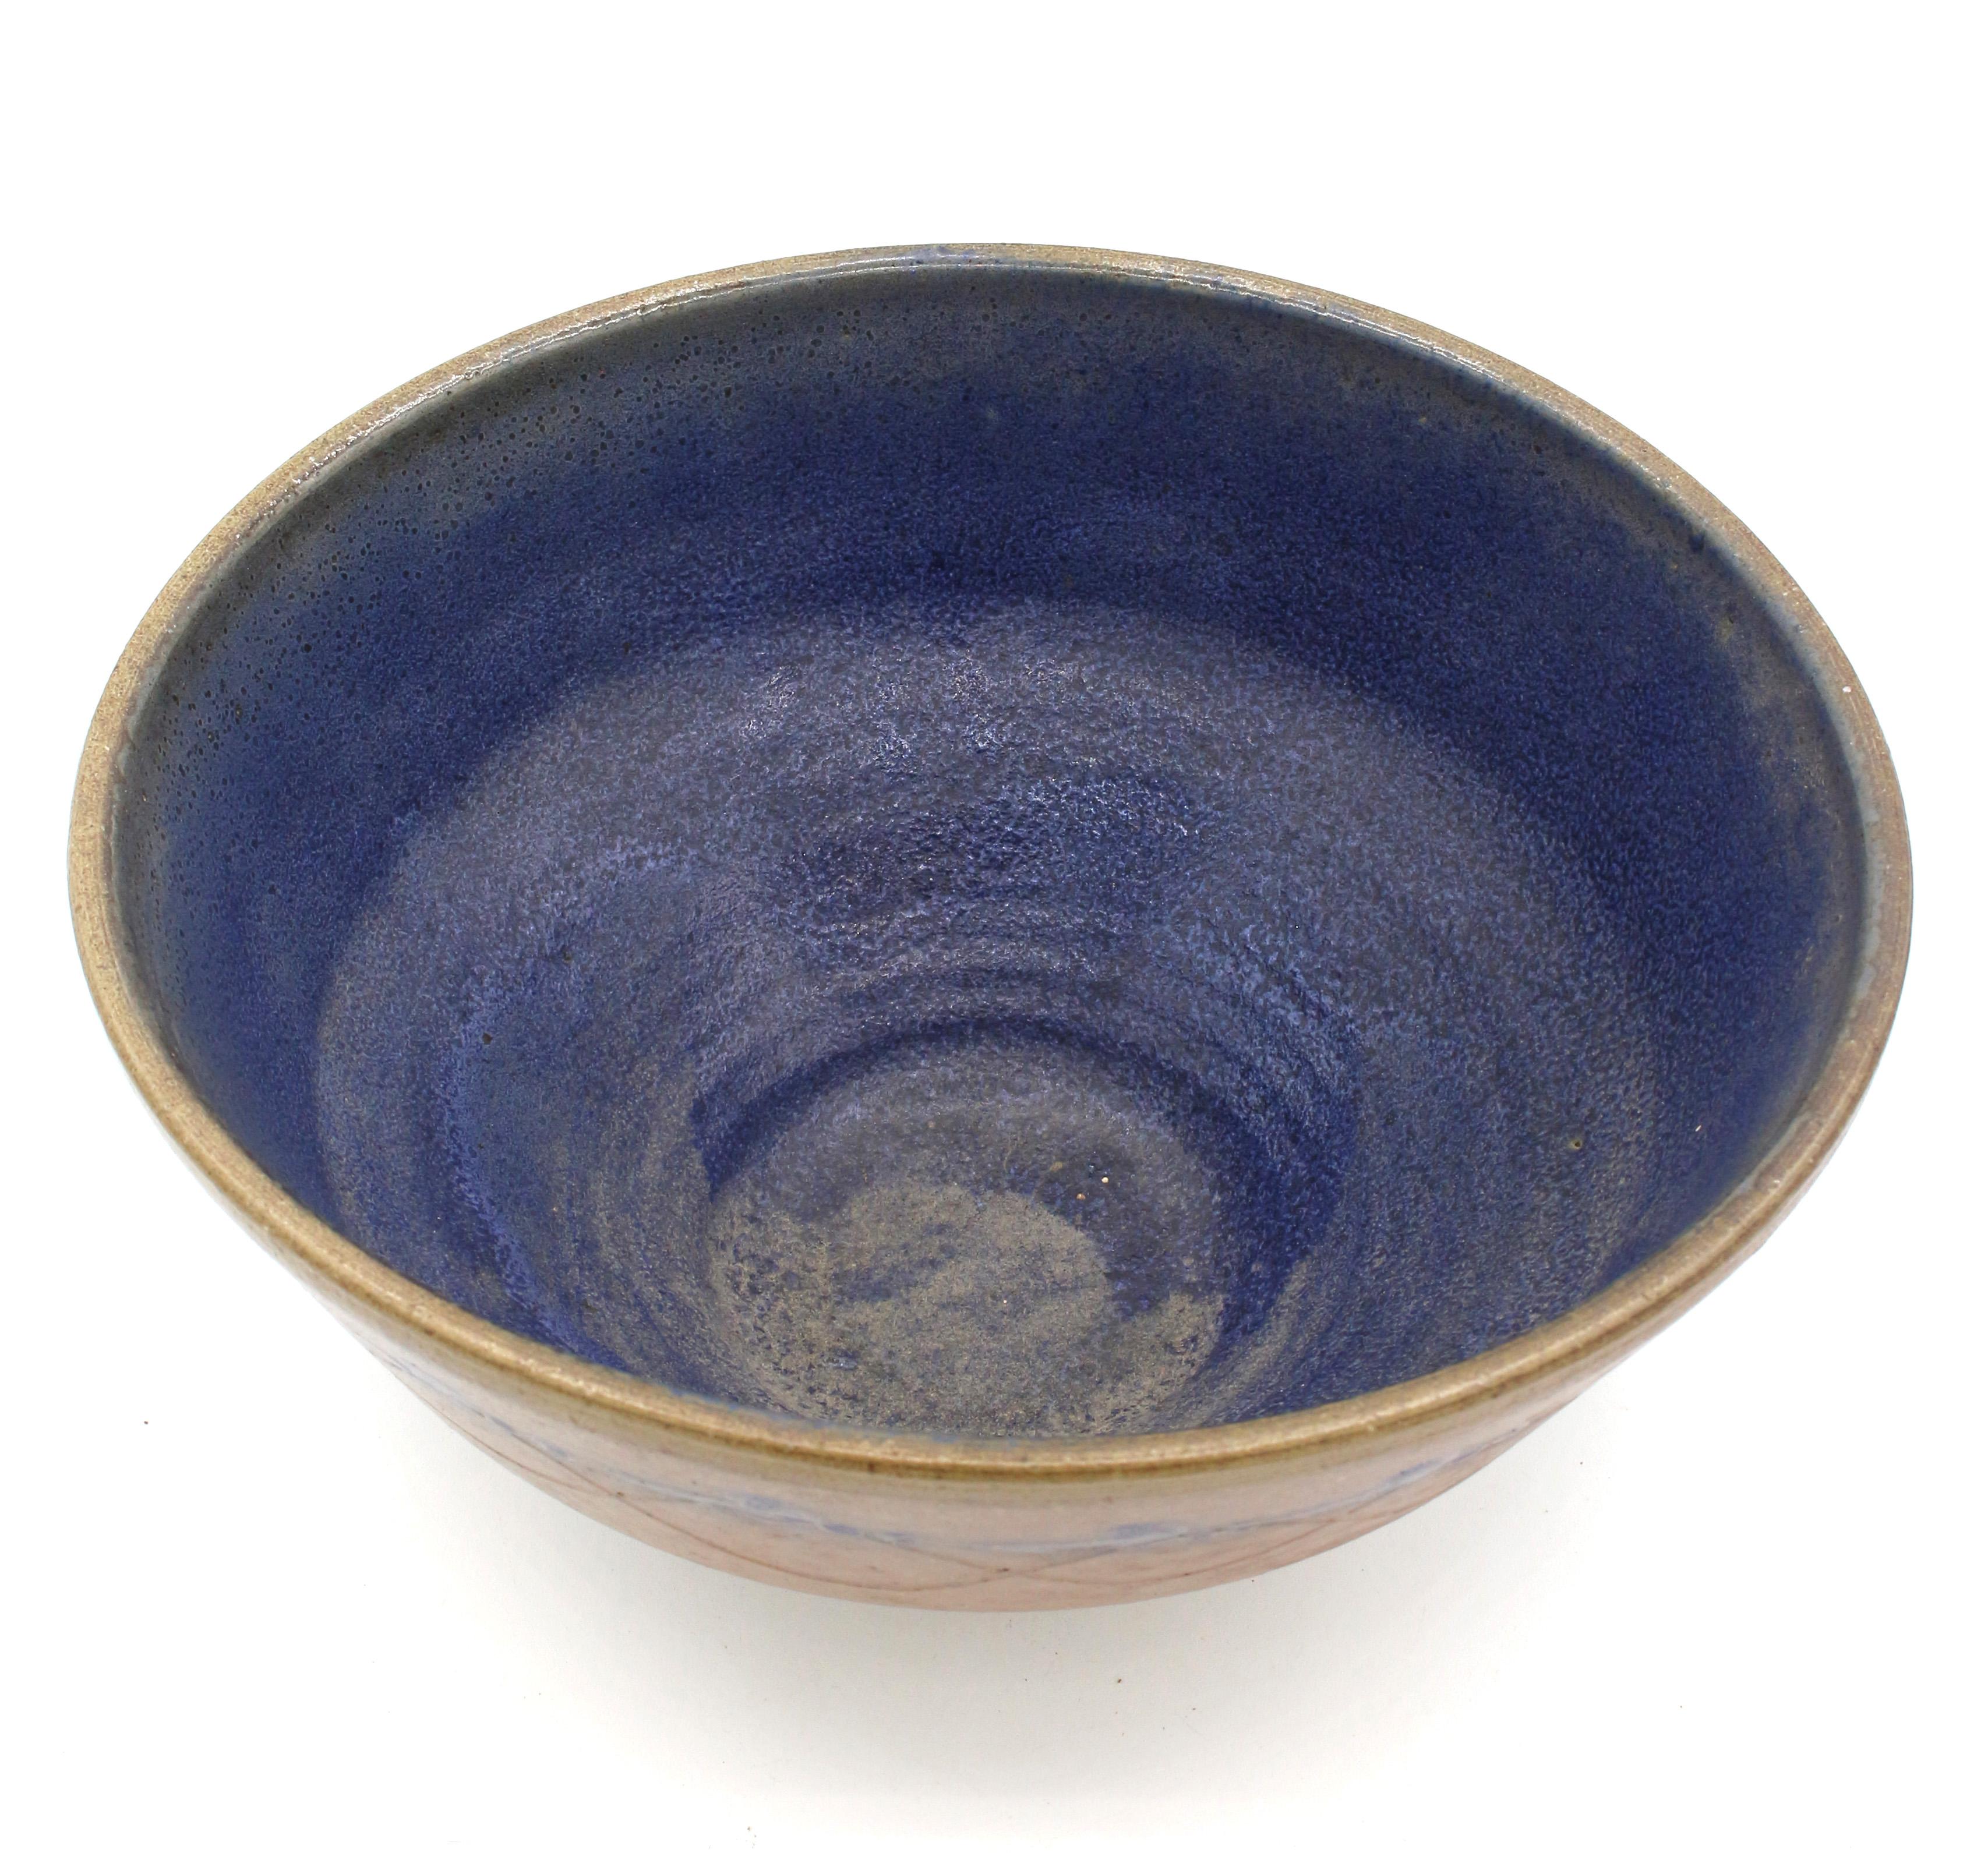 1960-72 Ben Owen, Master Potter, large fruit bowl. Known variously as Ben Owen I or Senior, he was the second known potter to work at Jugtown Pottery in 1923. Brown with royal blue interior and decoration. This decoration & form continues through